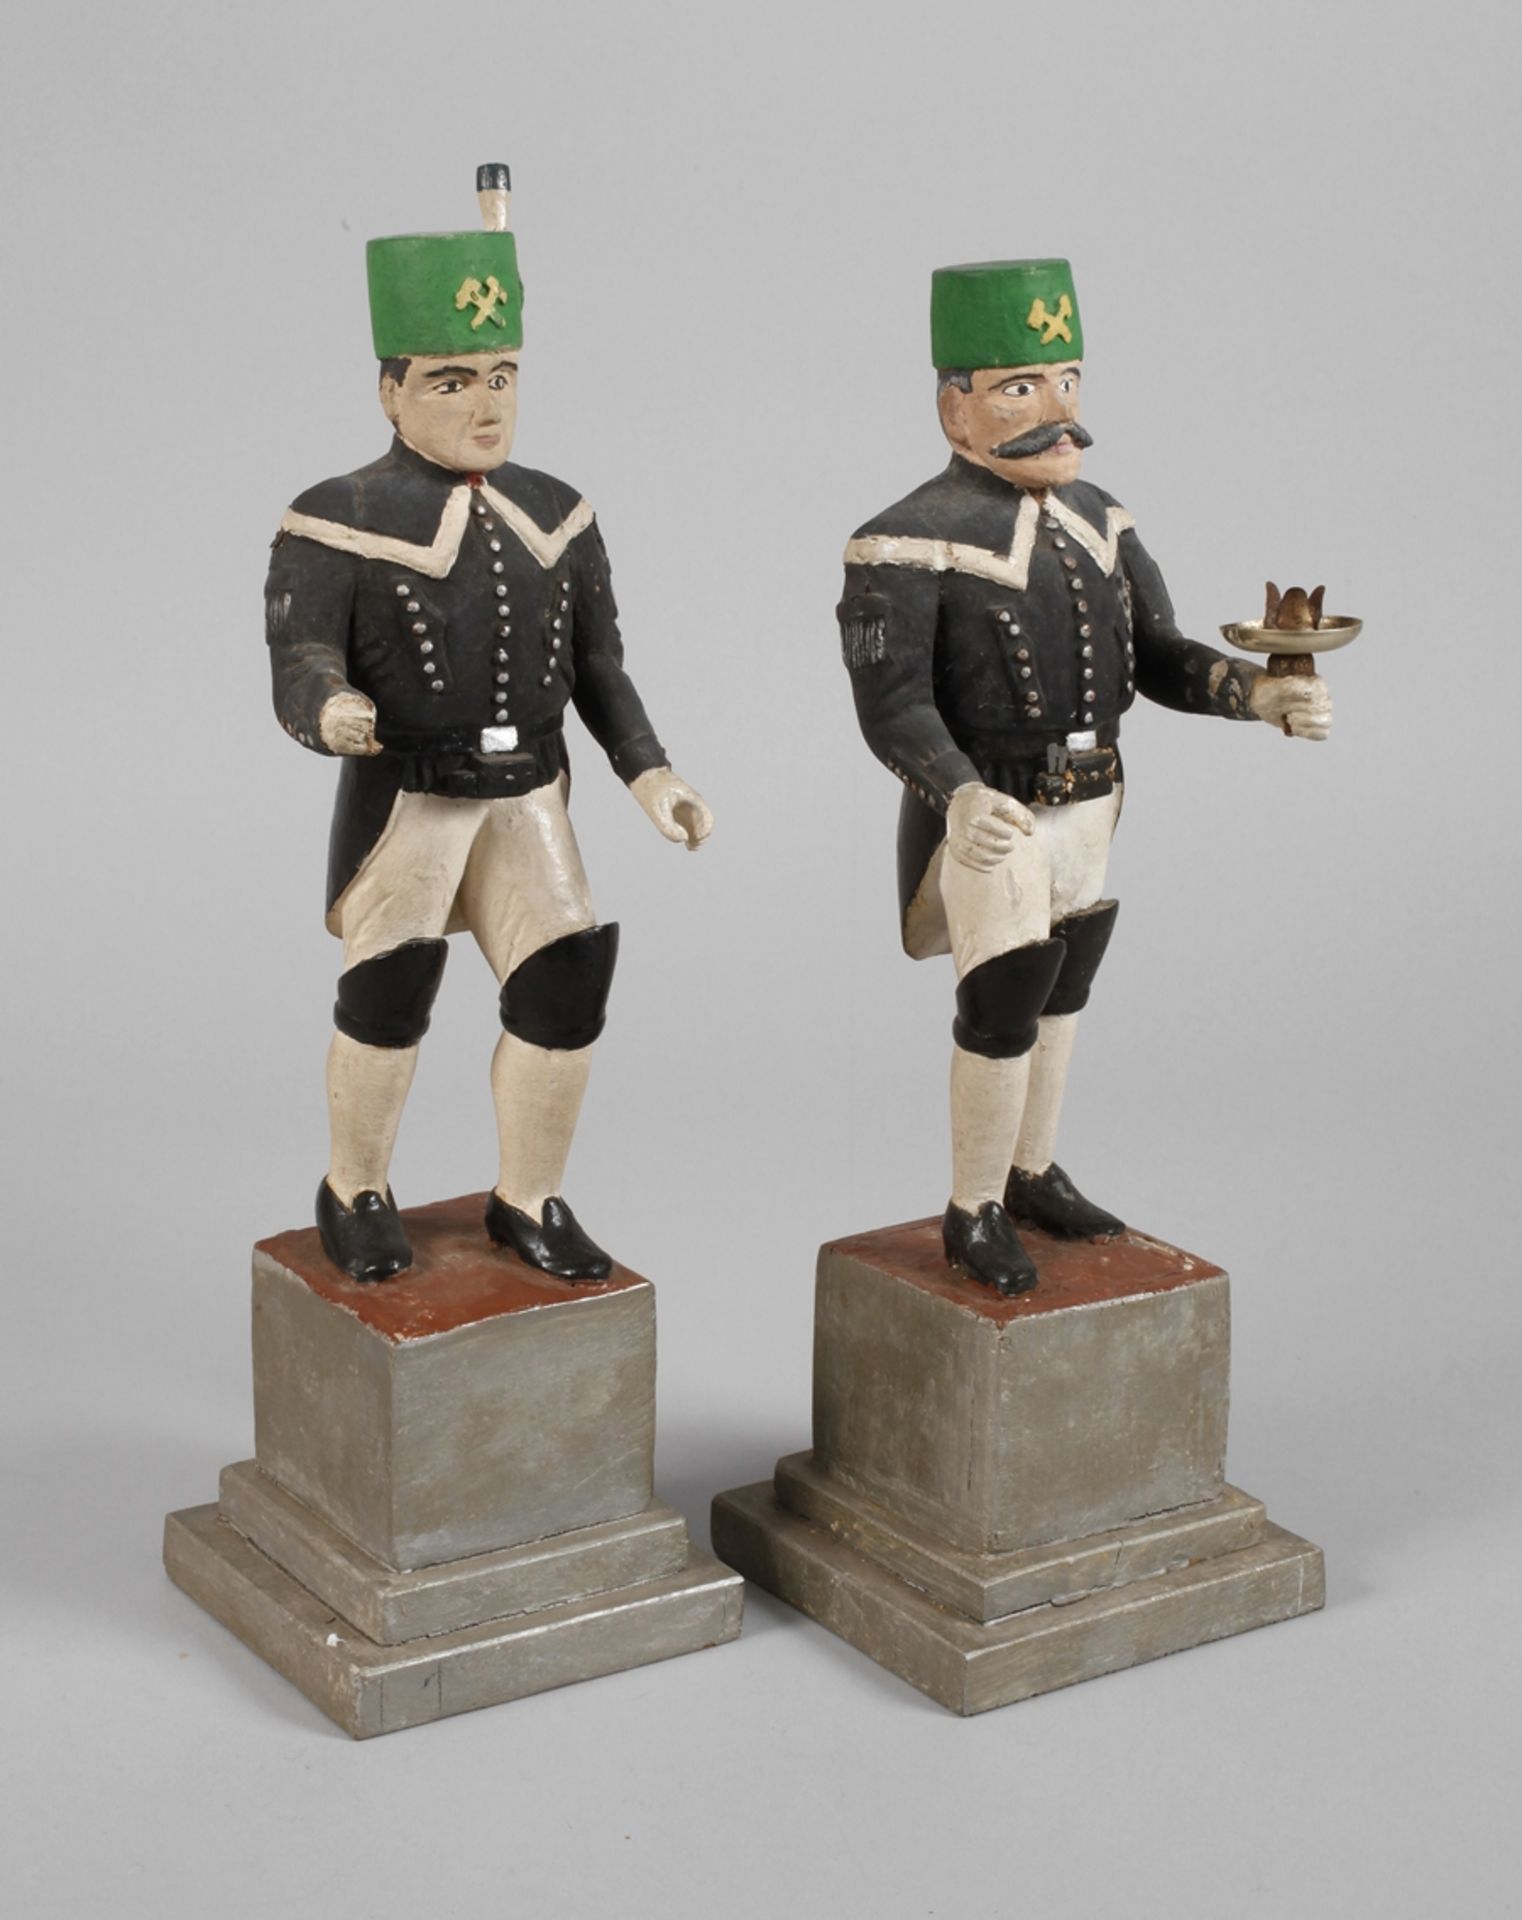 Pair of light miners from the Erzgebirge